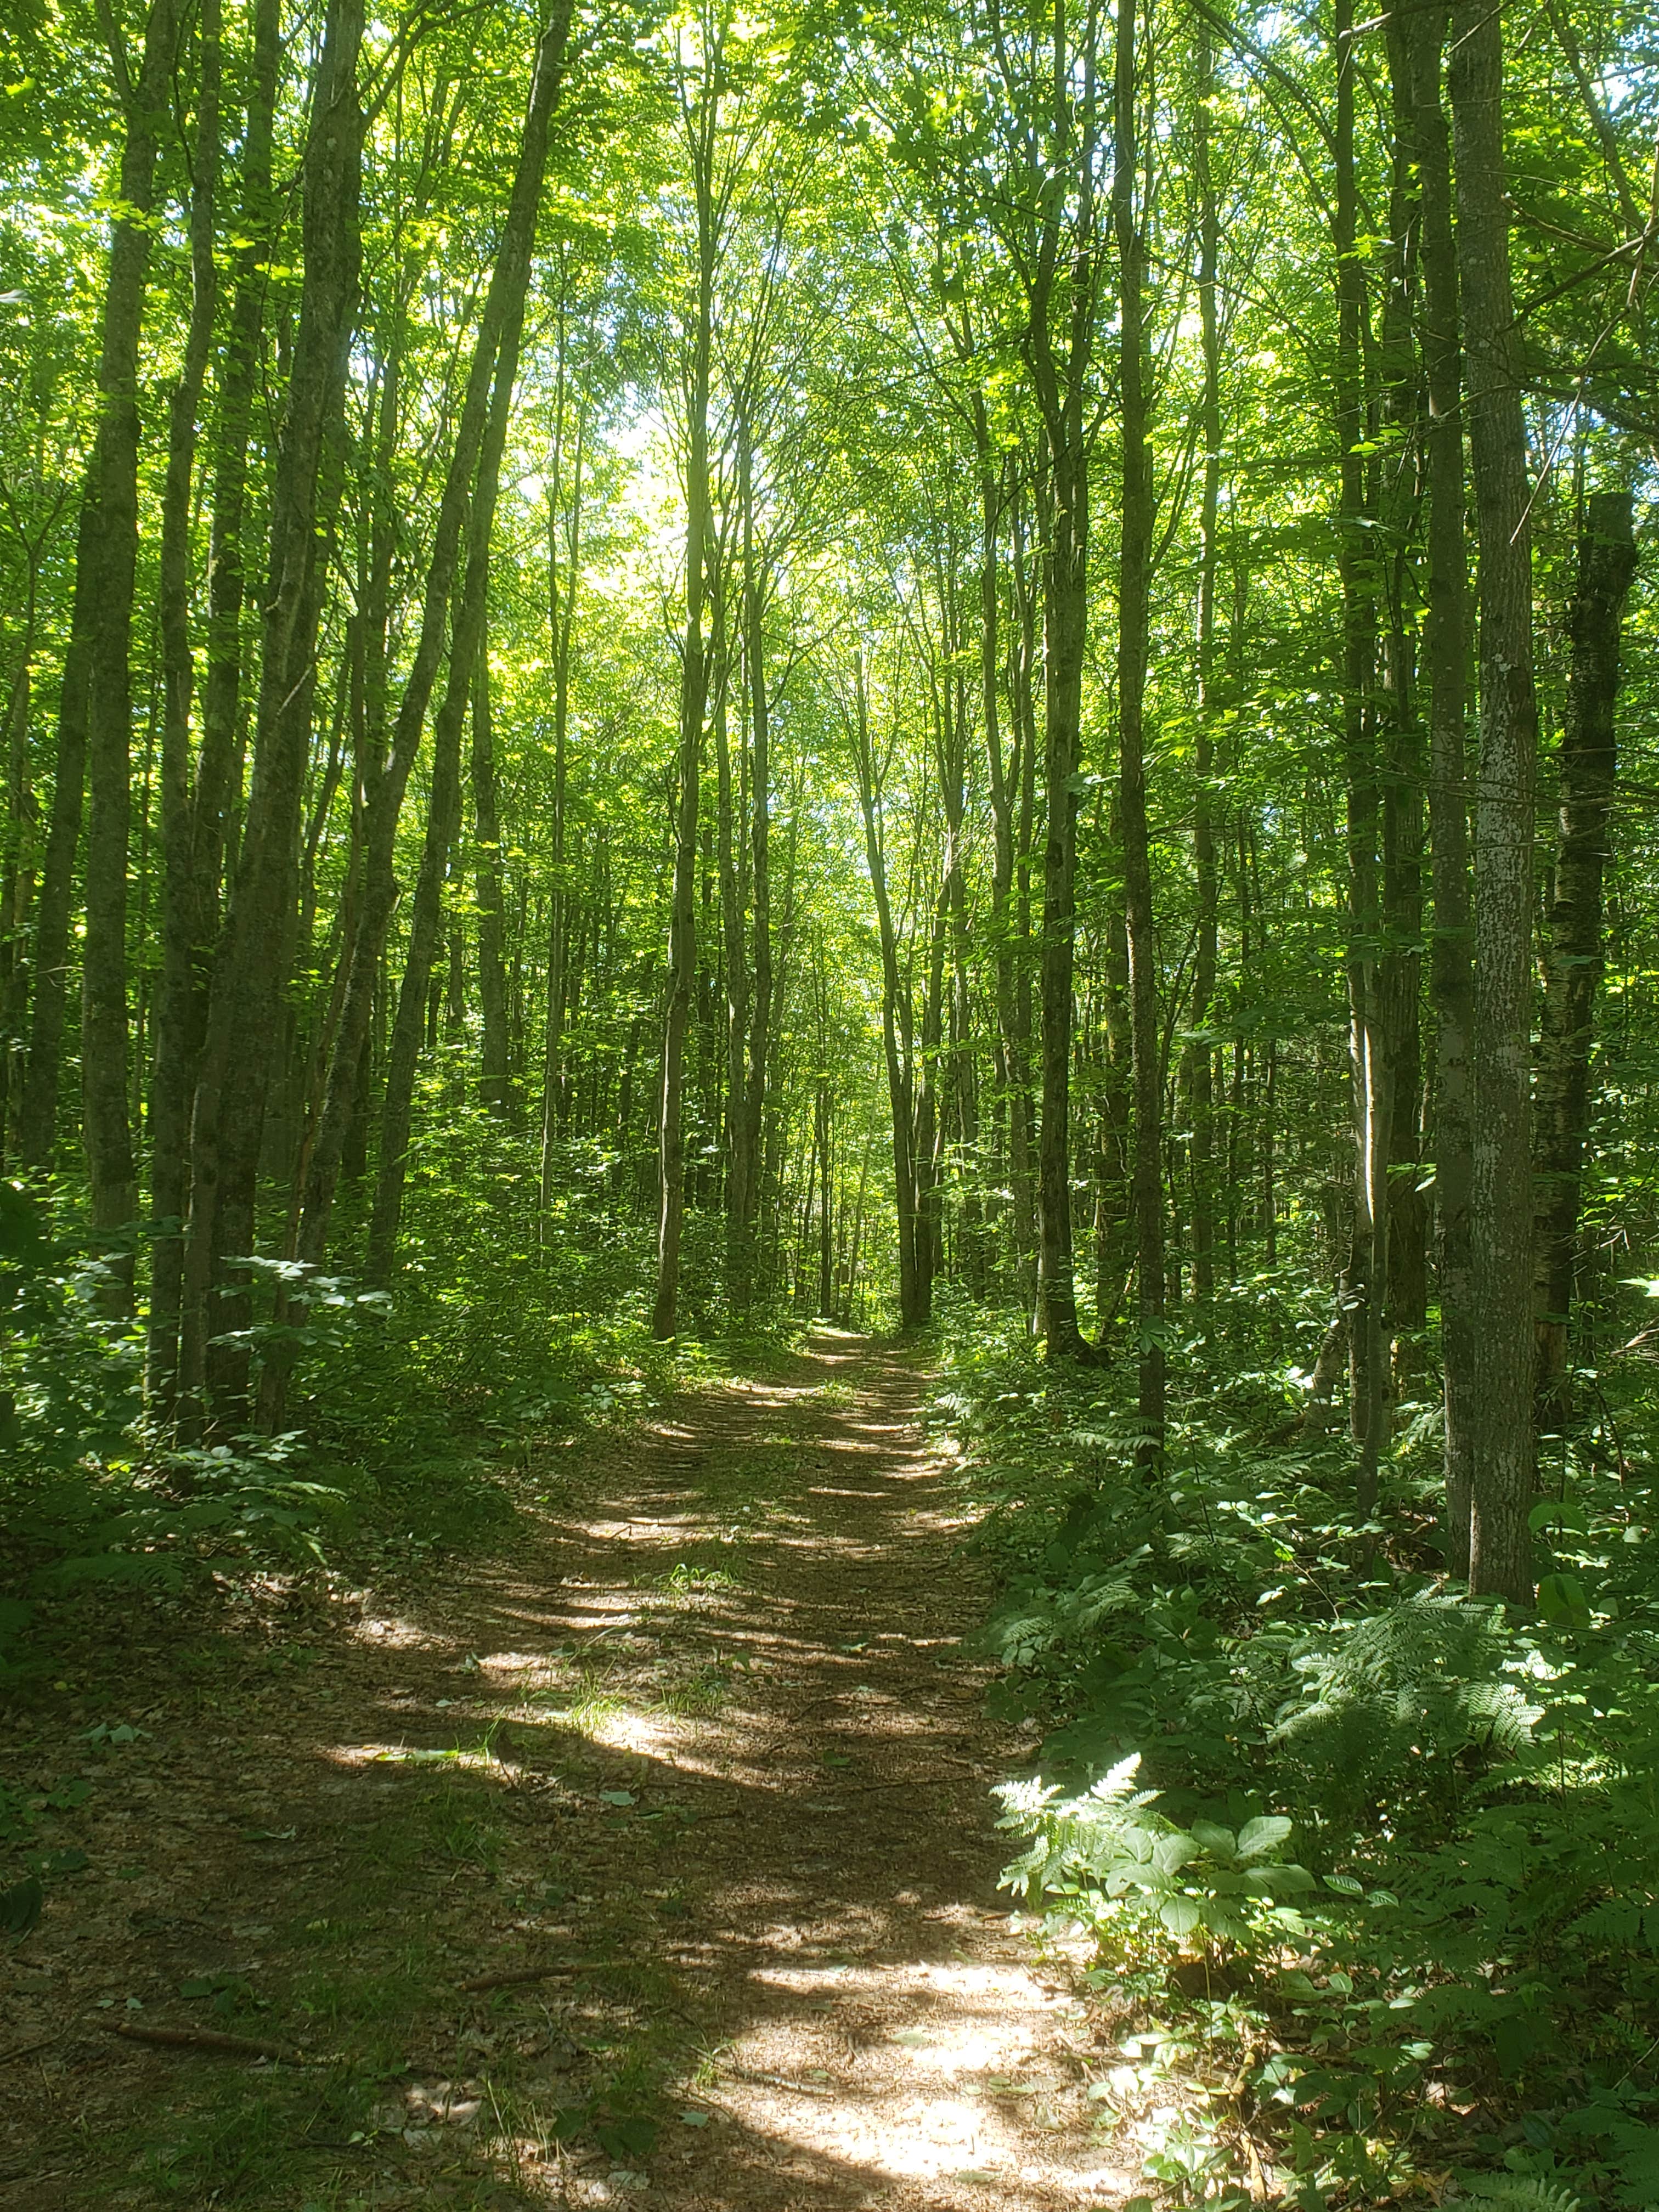 Hiking at Pine Baron trails, which are about a 10 minute drive away and maintained by Otsego Lake State Park